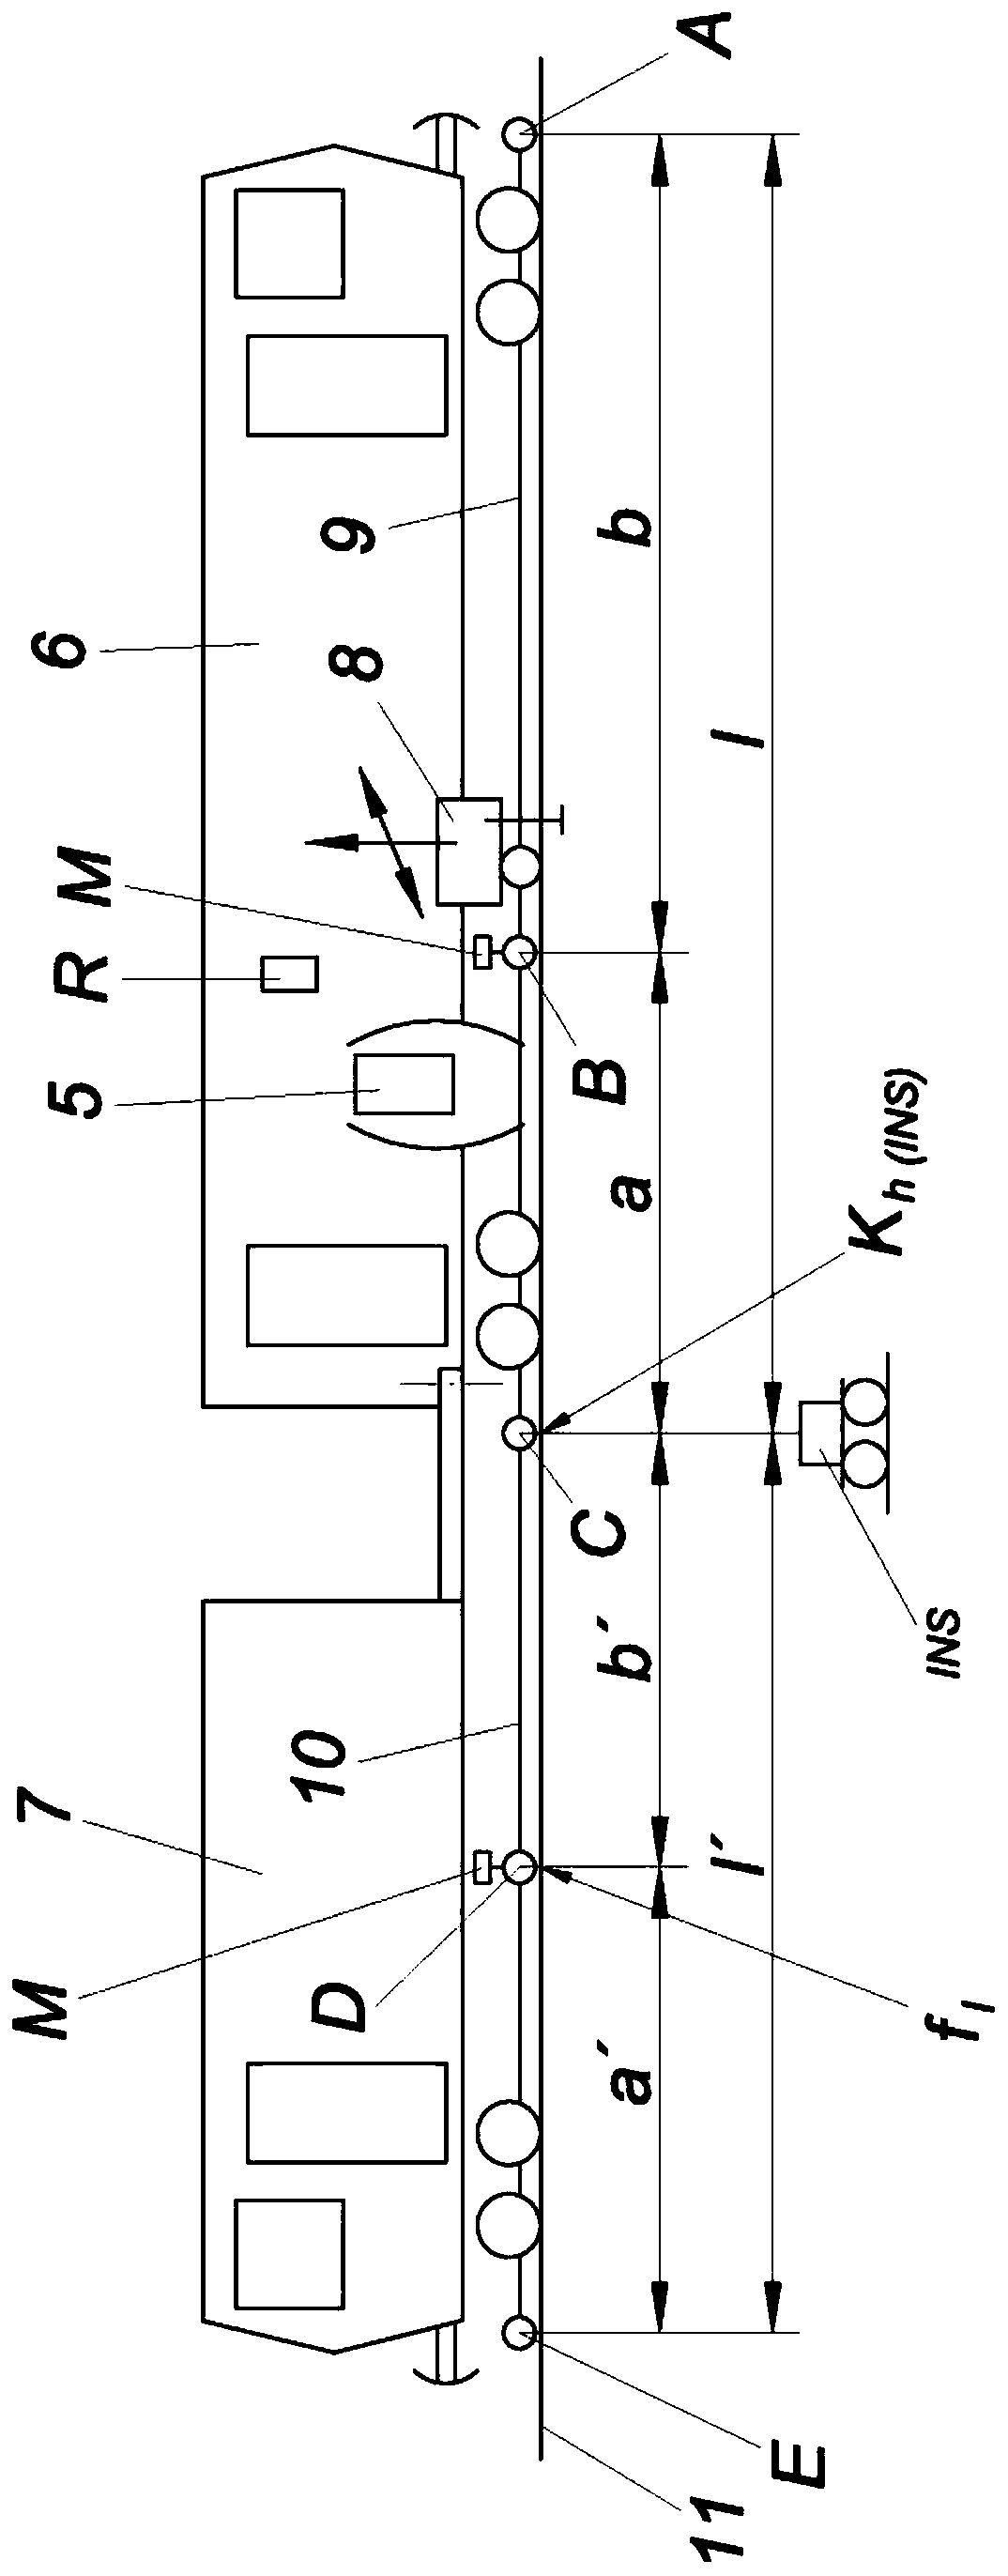 Method for track position improvement by means of a track-movable track-tamping machine